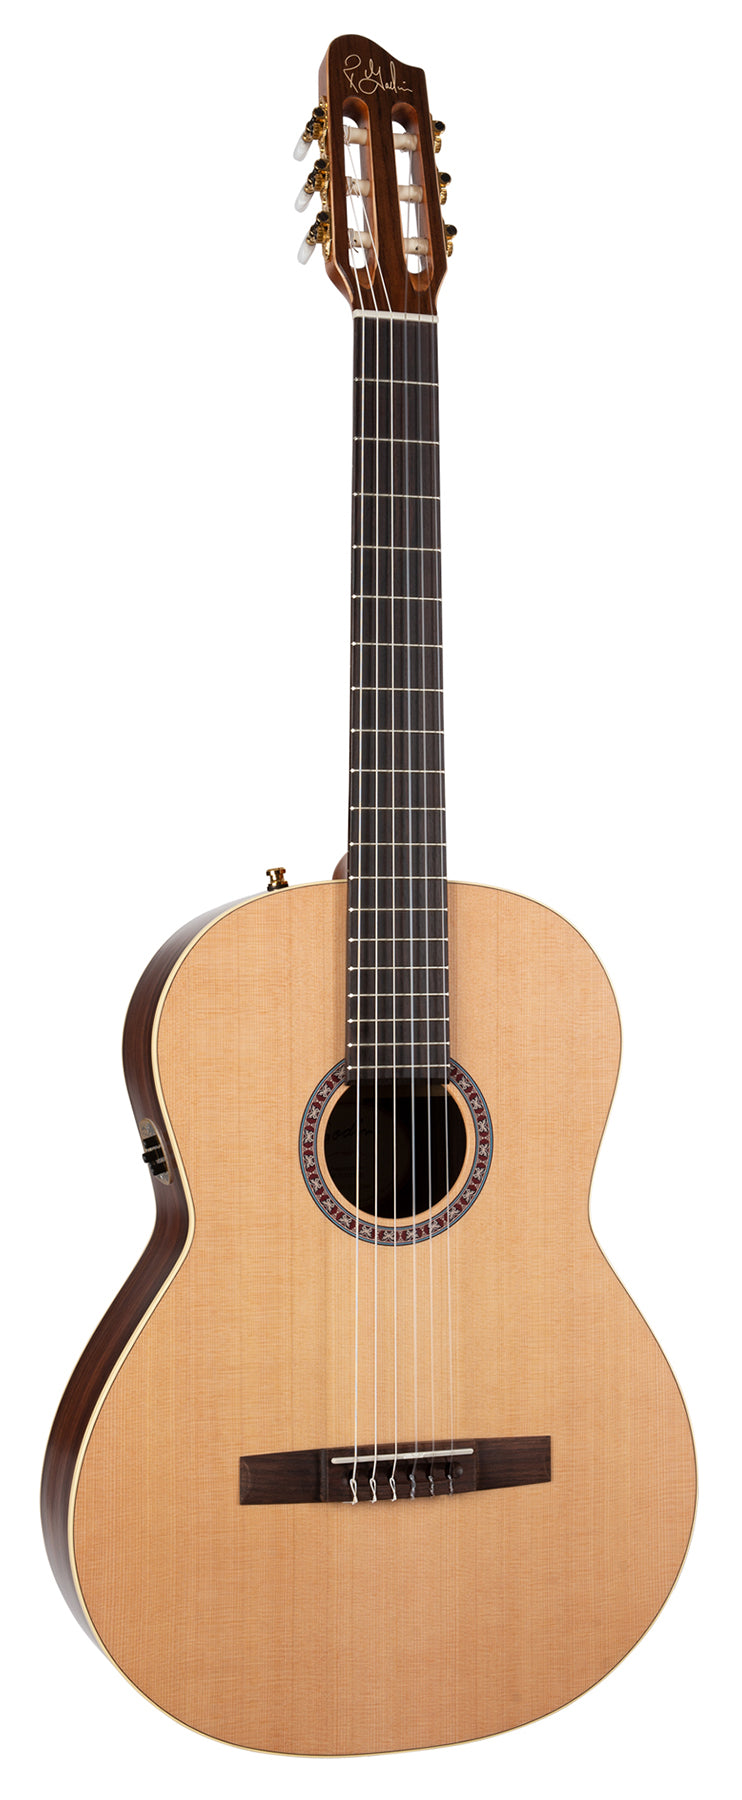 Godin 049769 / 051885 Presentation QIT Pickup Solid Top Classical Nylon Guitar with Bag Made In Canada